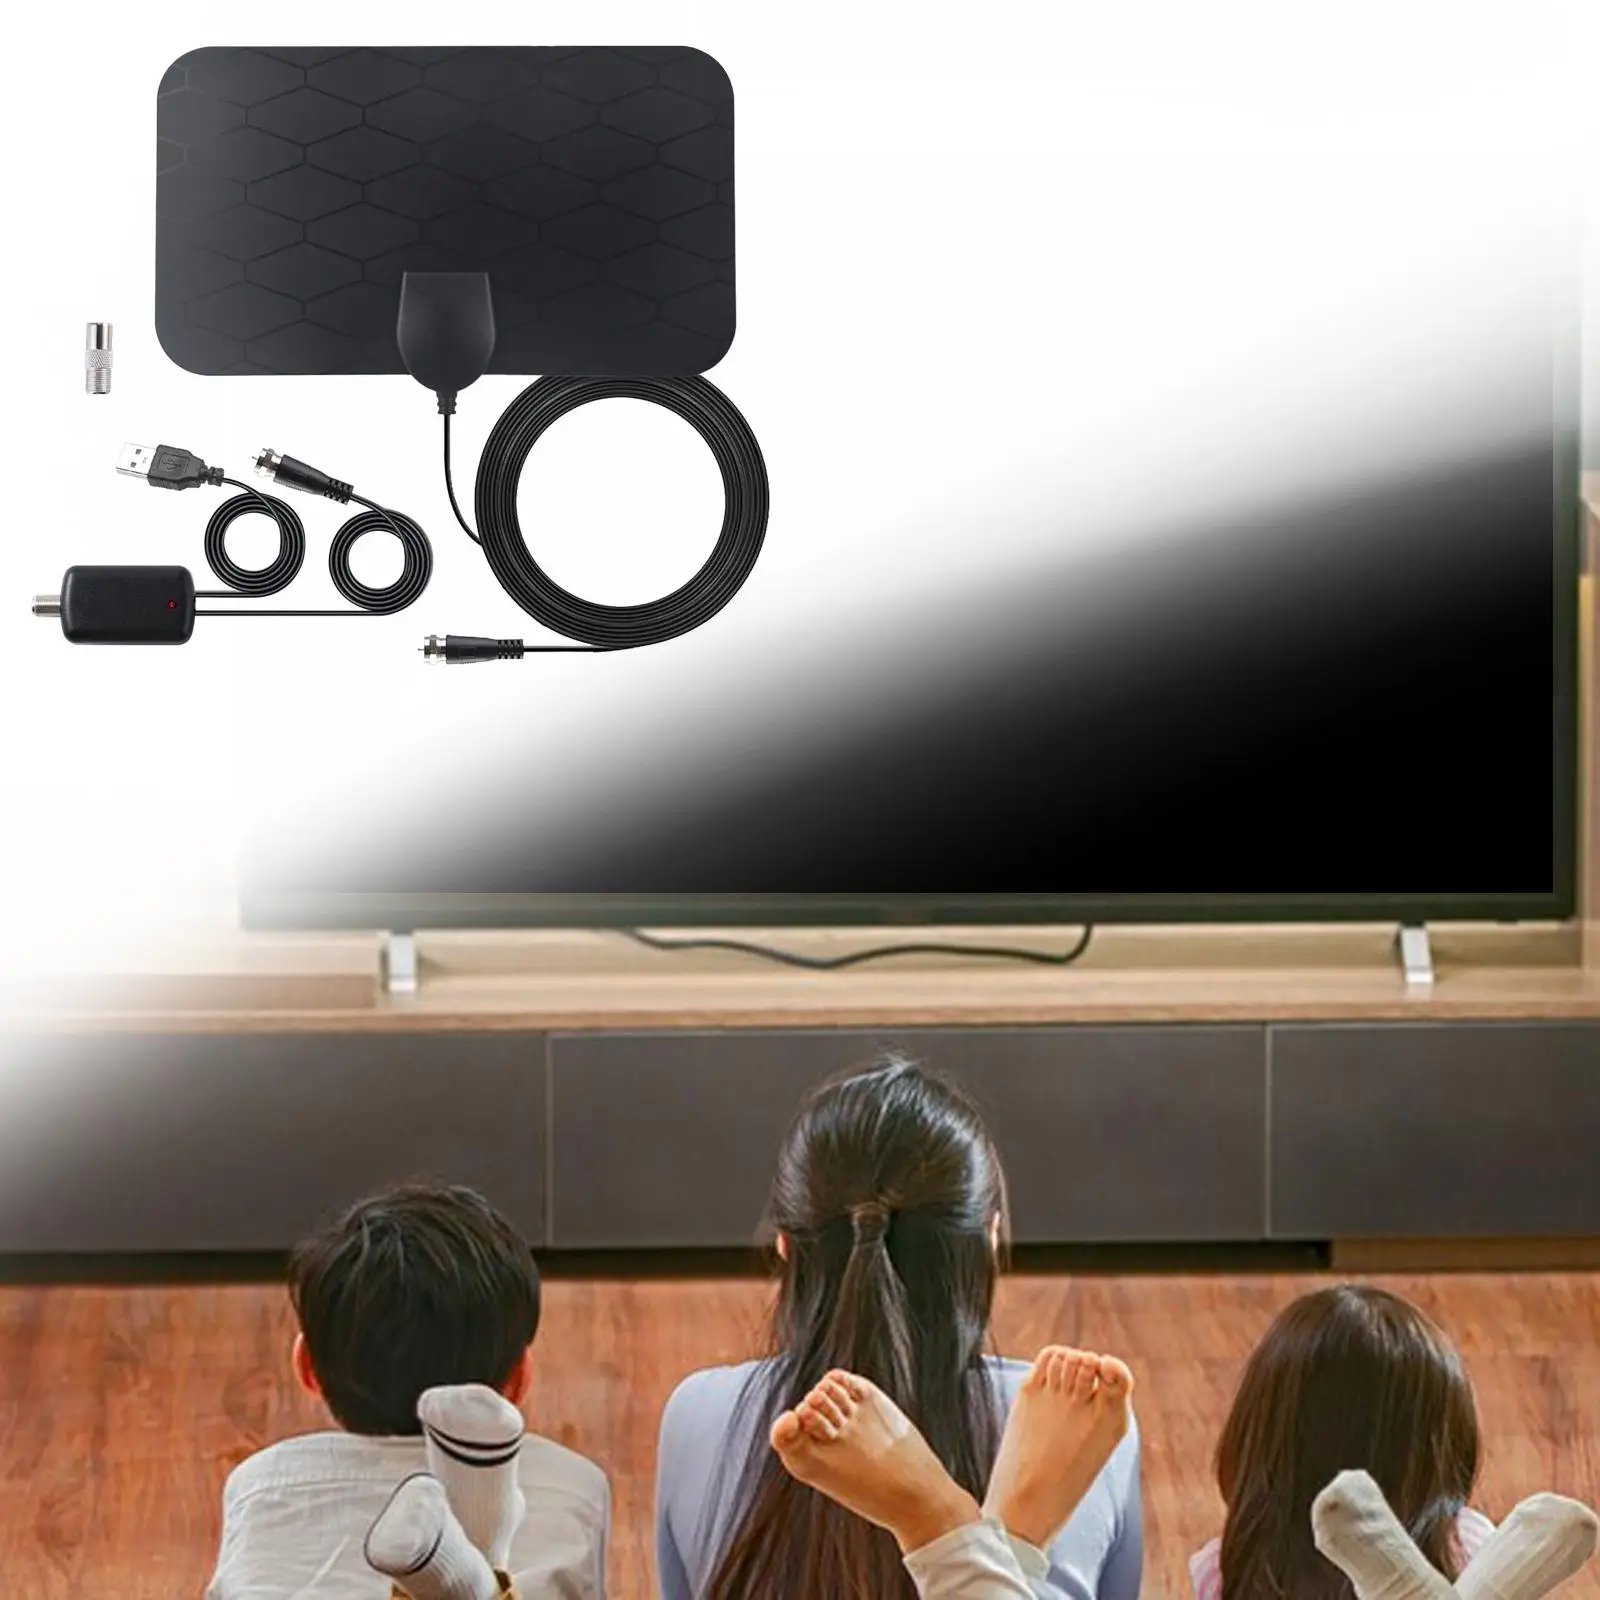 Digital TV Antenna Clear Picture smart HDTV Antenna Signal Booster